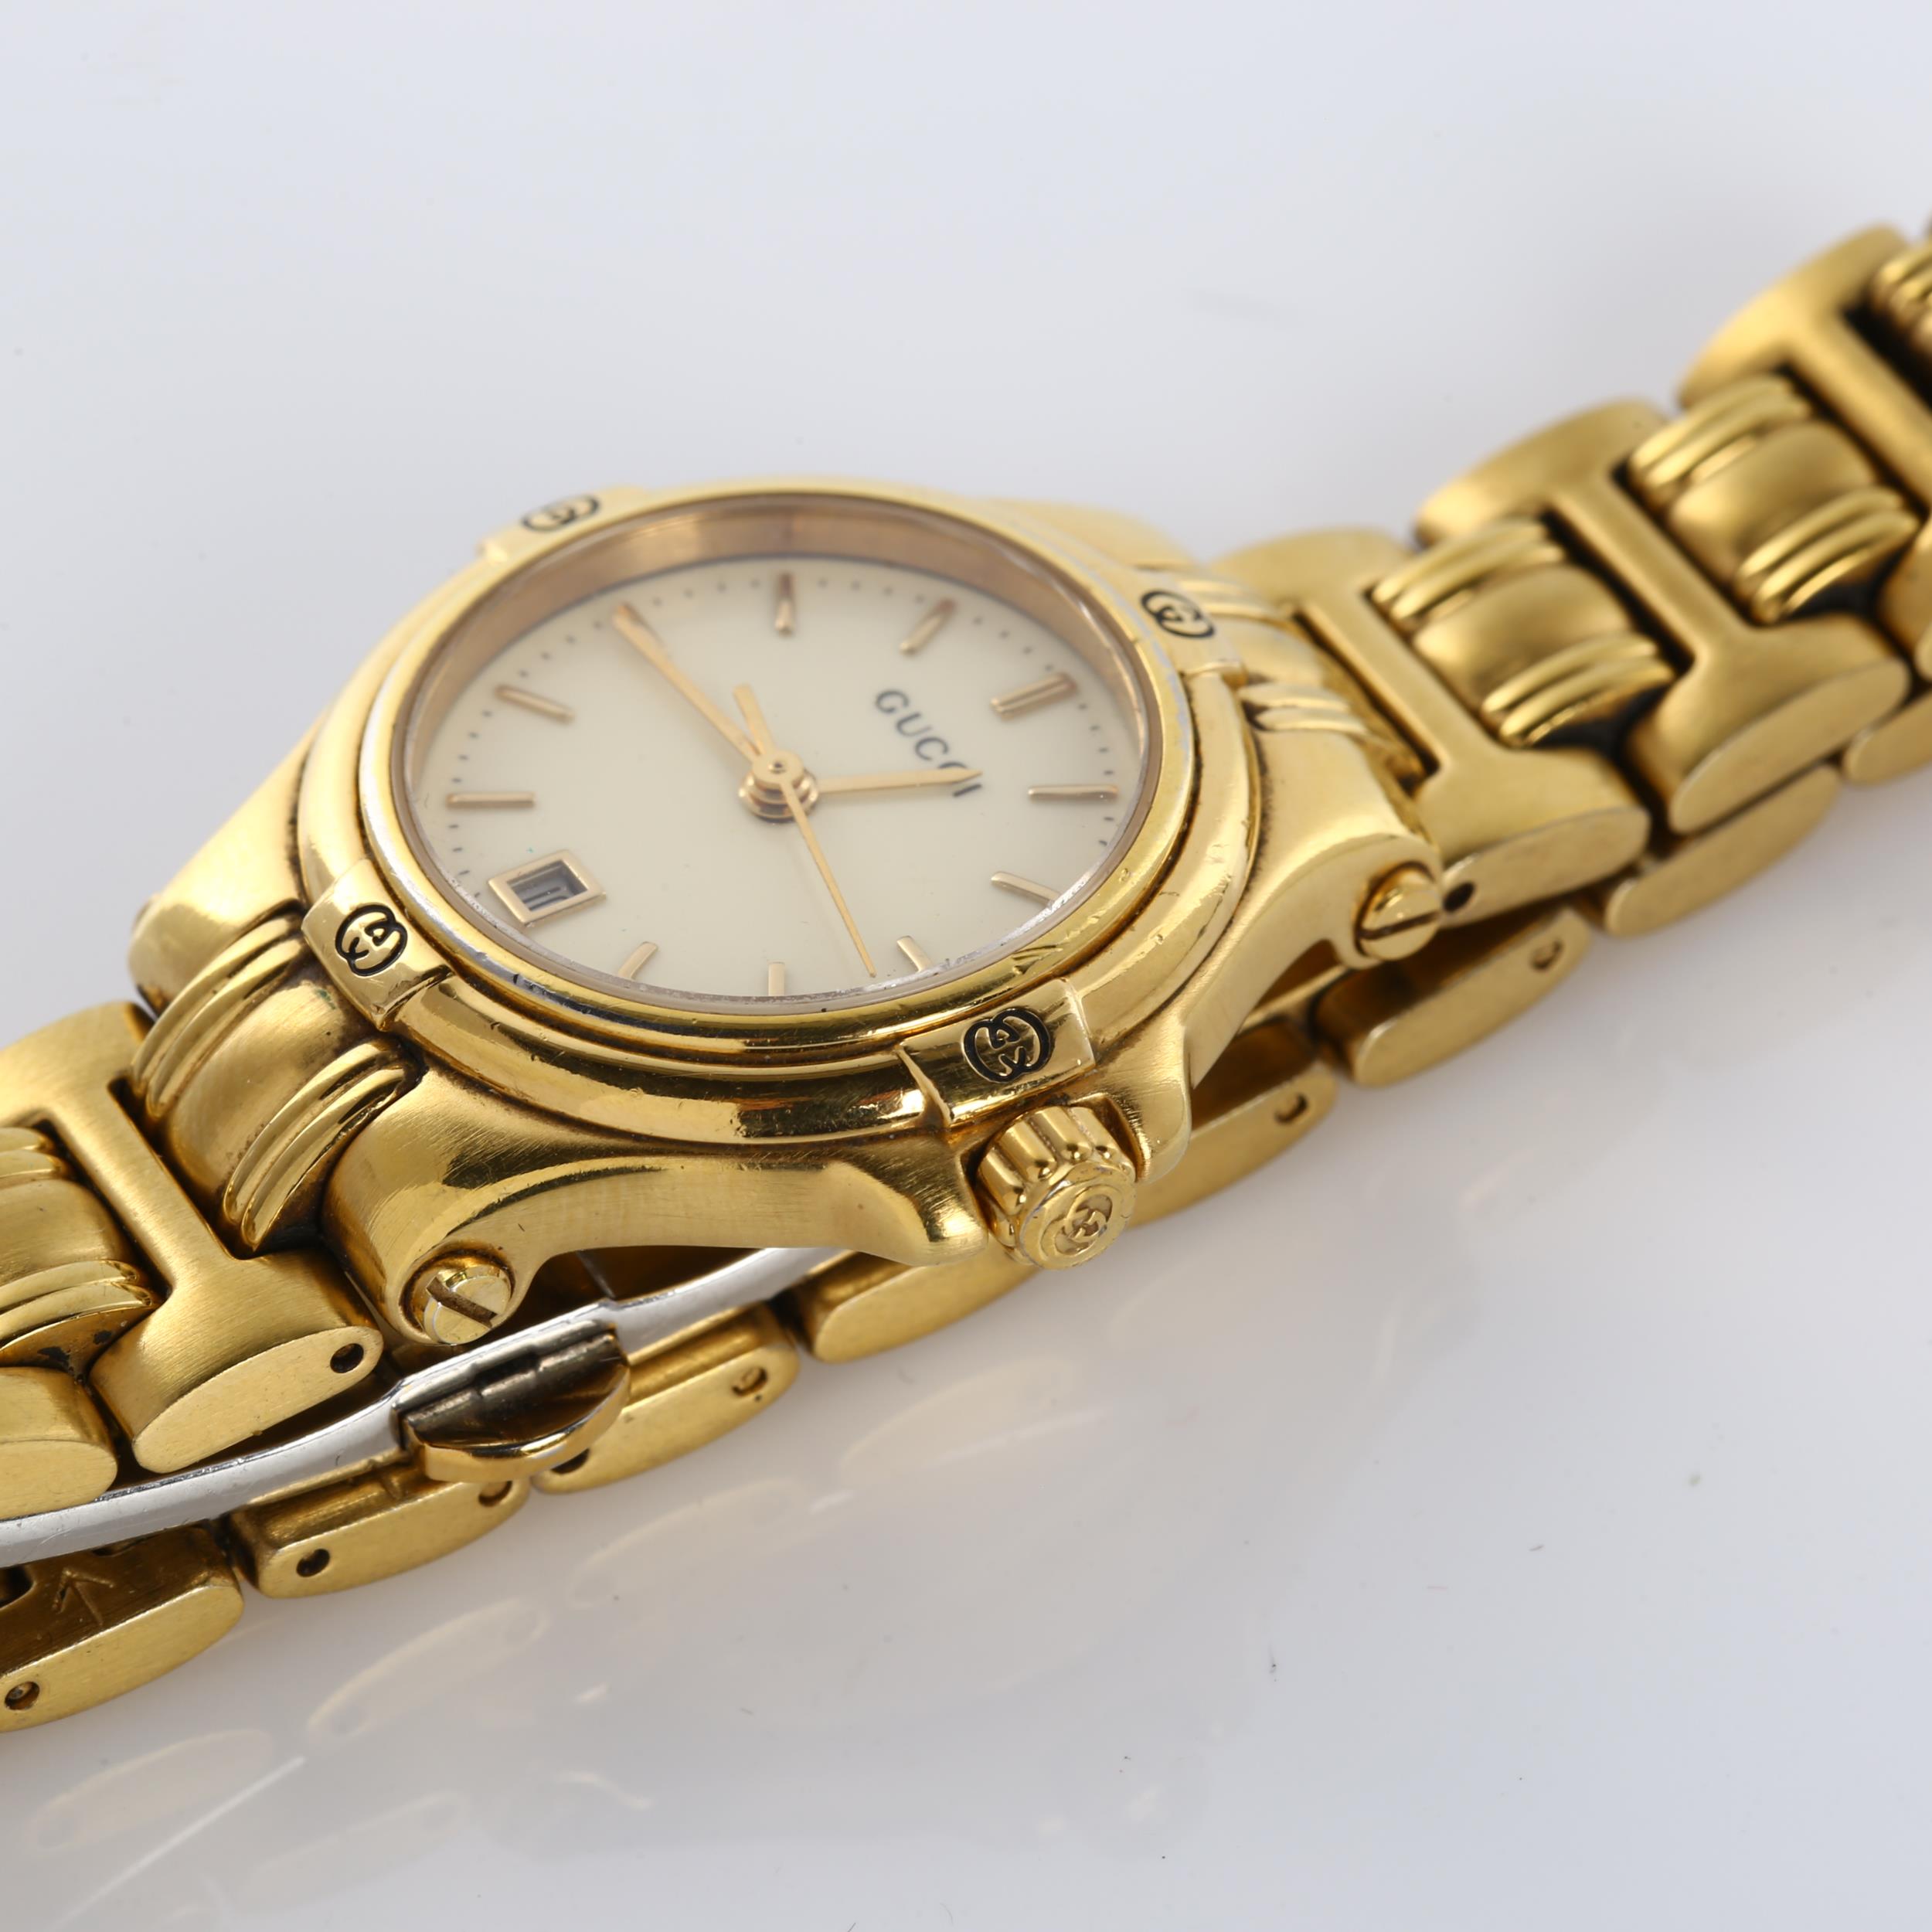 GUCCI - a lady's gold plated 9240L quartz bracelet watch, cream dial with gilded baton hour markers, - Image 3 of 5